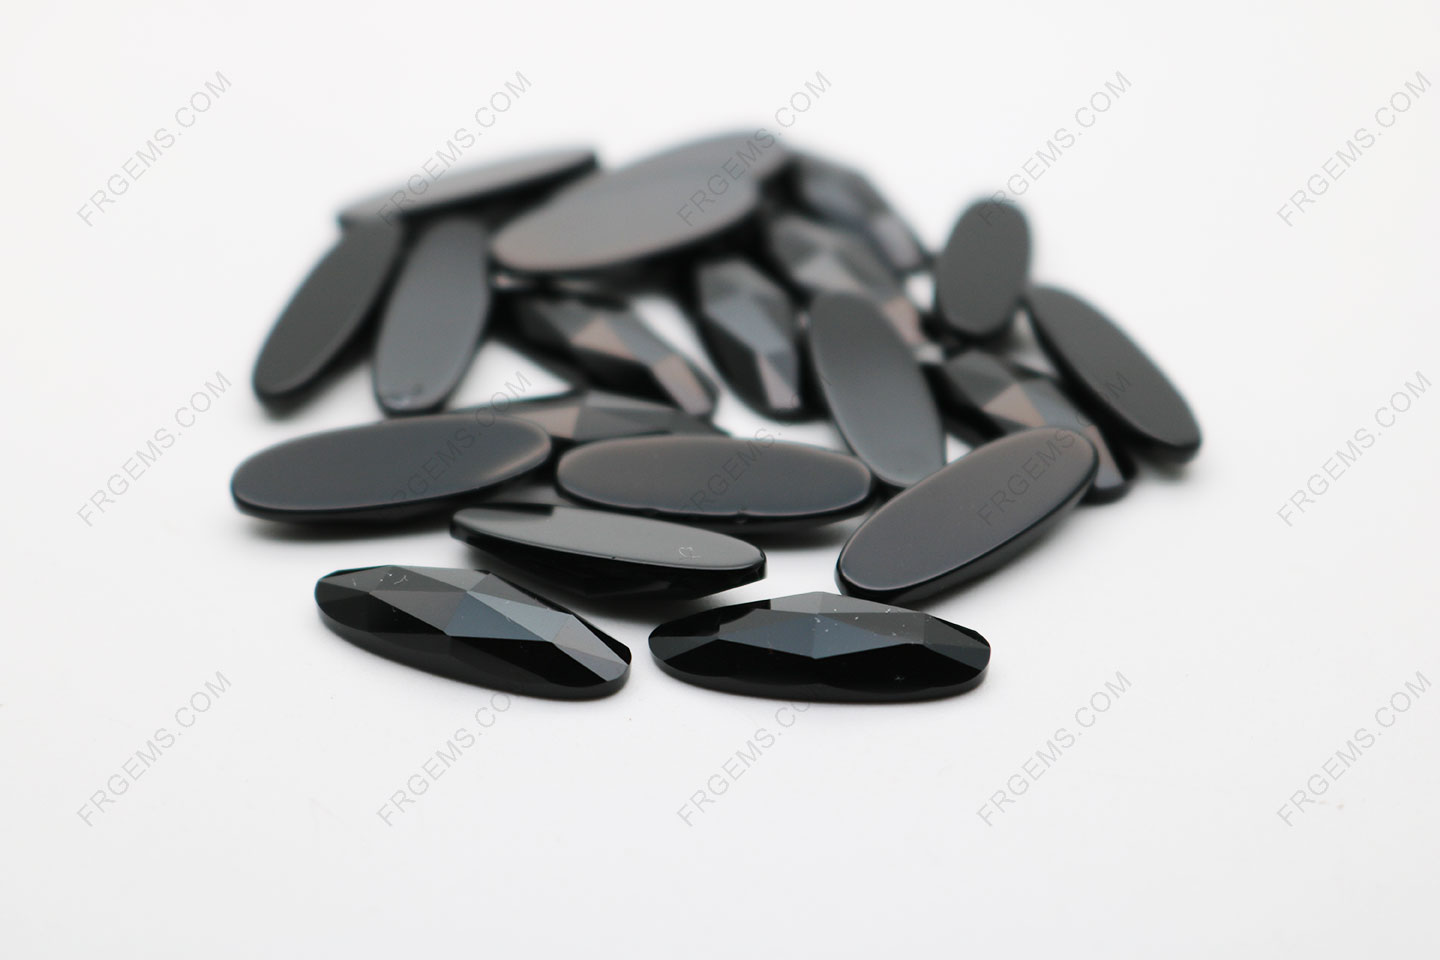 Natural-Black-Onyx-Oval-shape-rose-faceted-20x7mm-gemstones-China-Supplier-IMG_4857